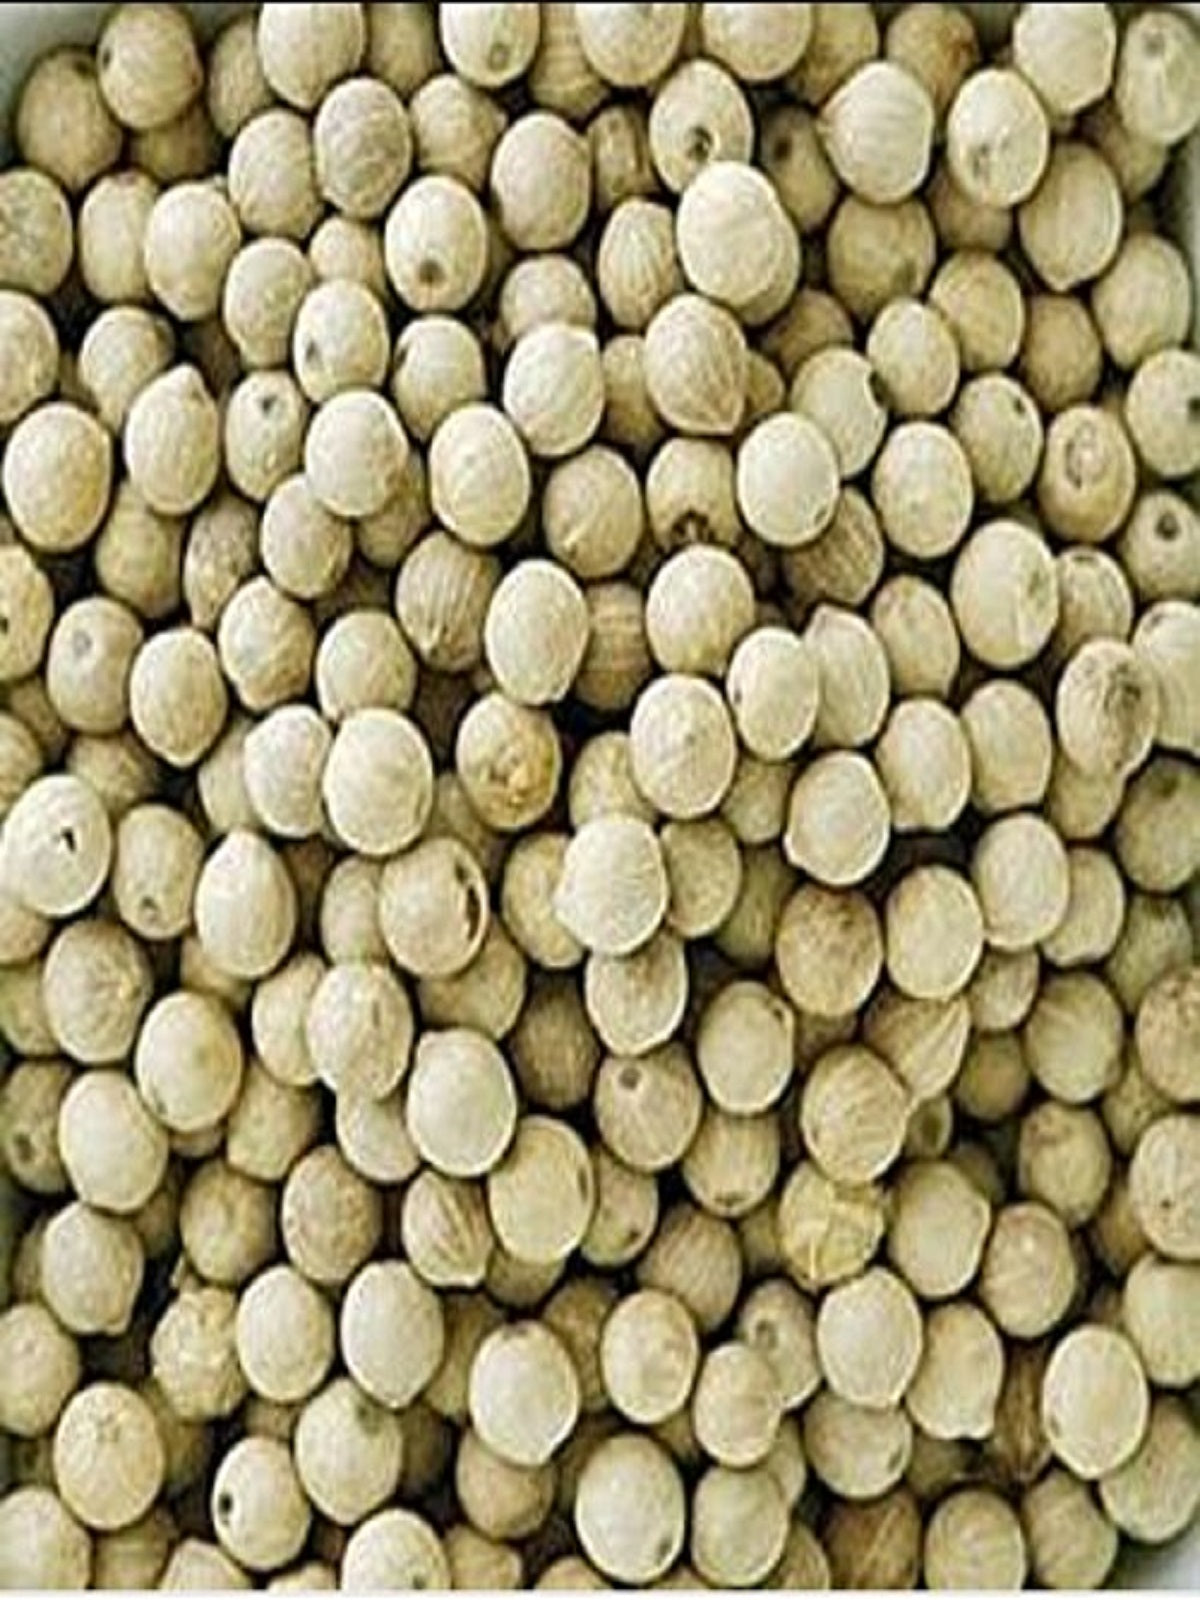 Buy the best quality Safed Mirch /White Pepper online at Farmonics